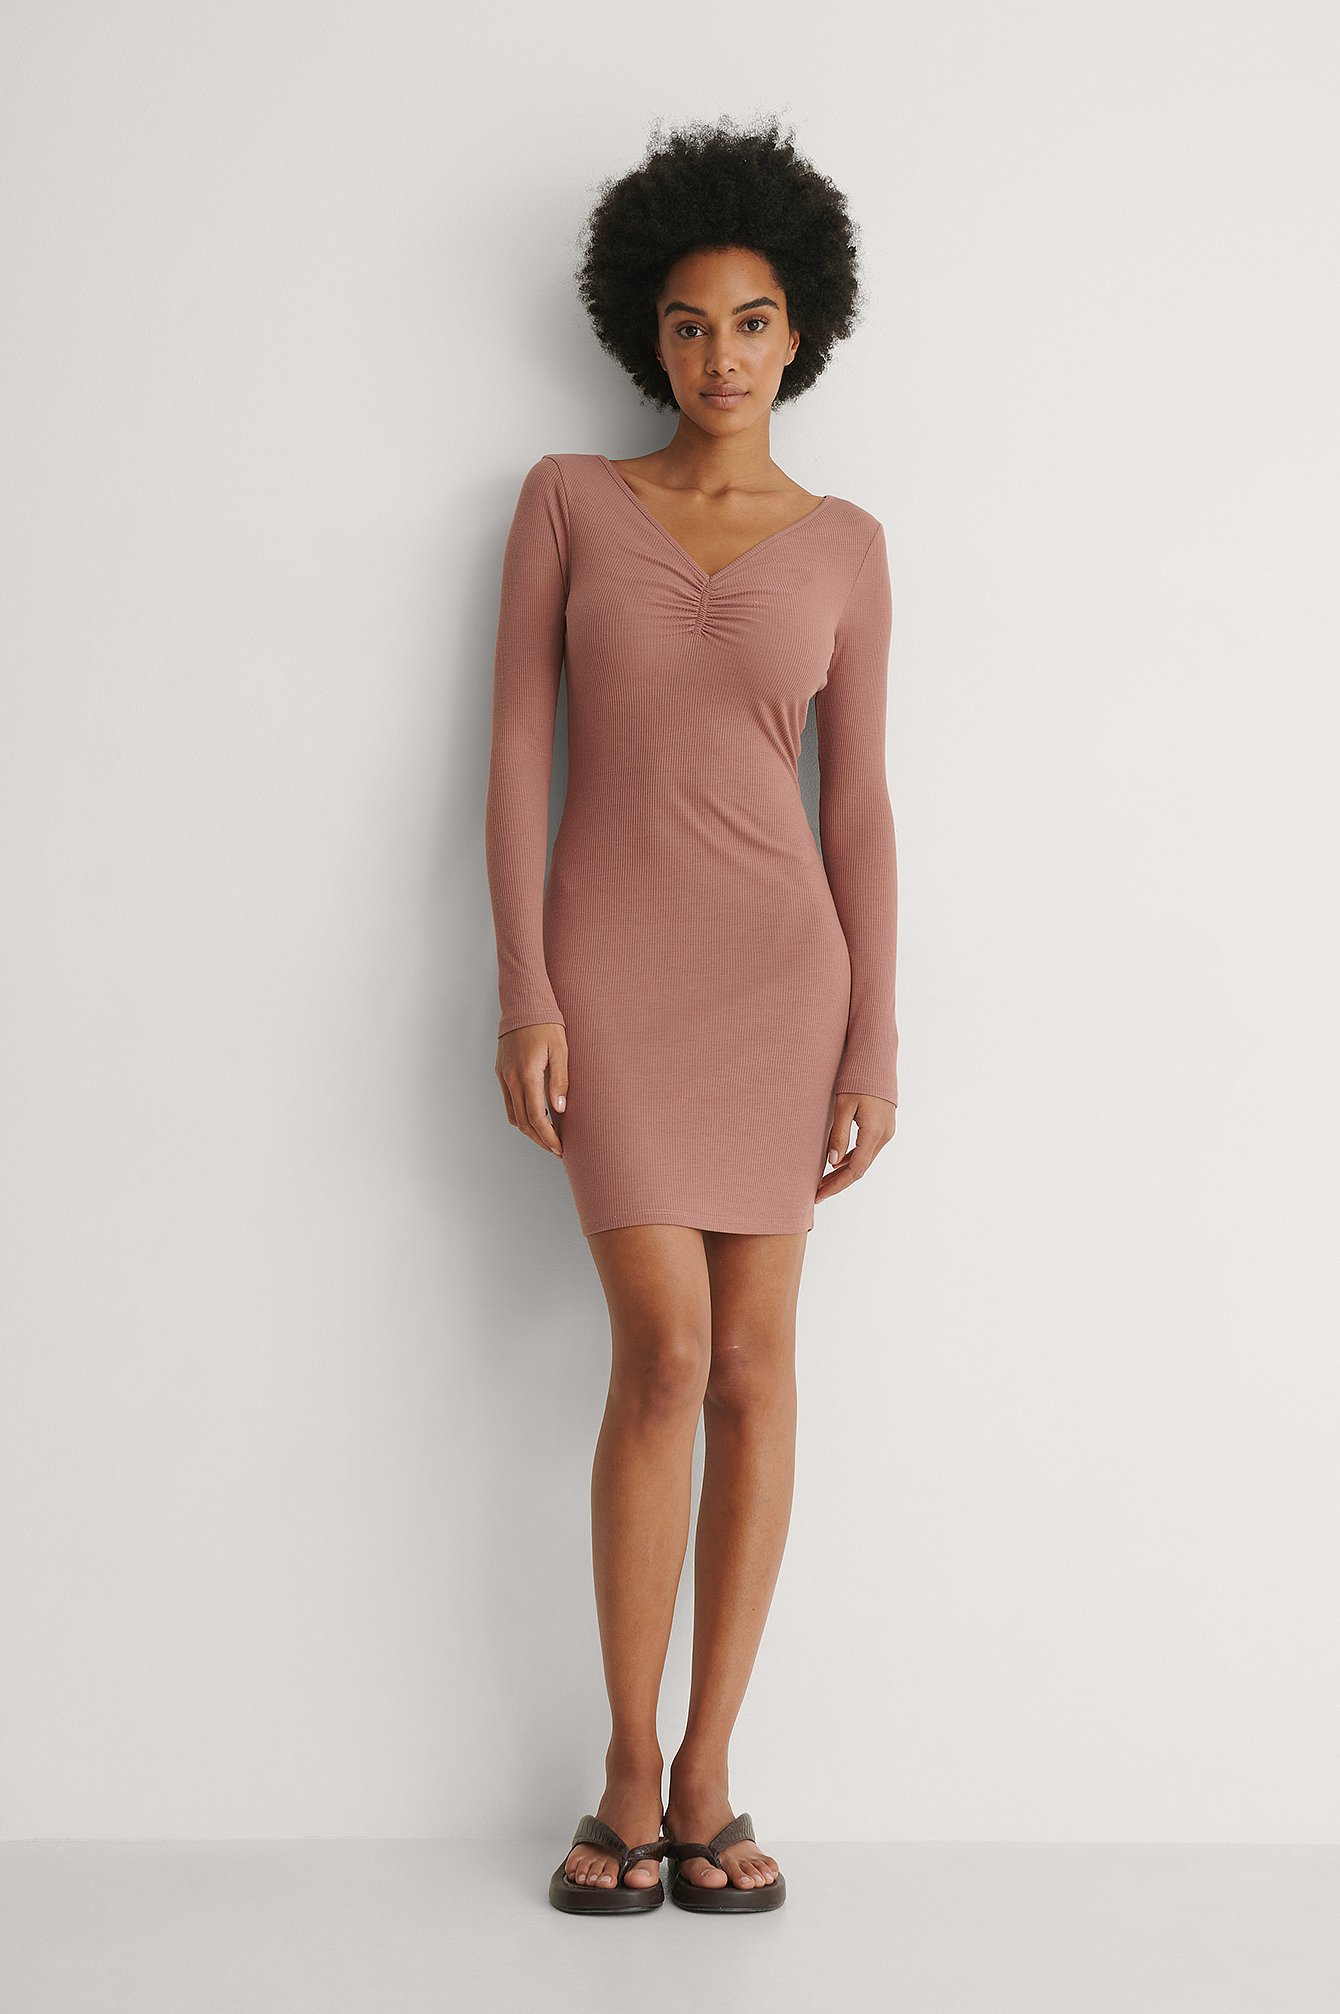 Ruched Rib Dress Outfit.